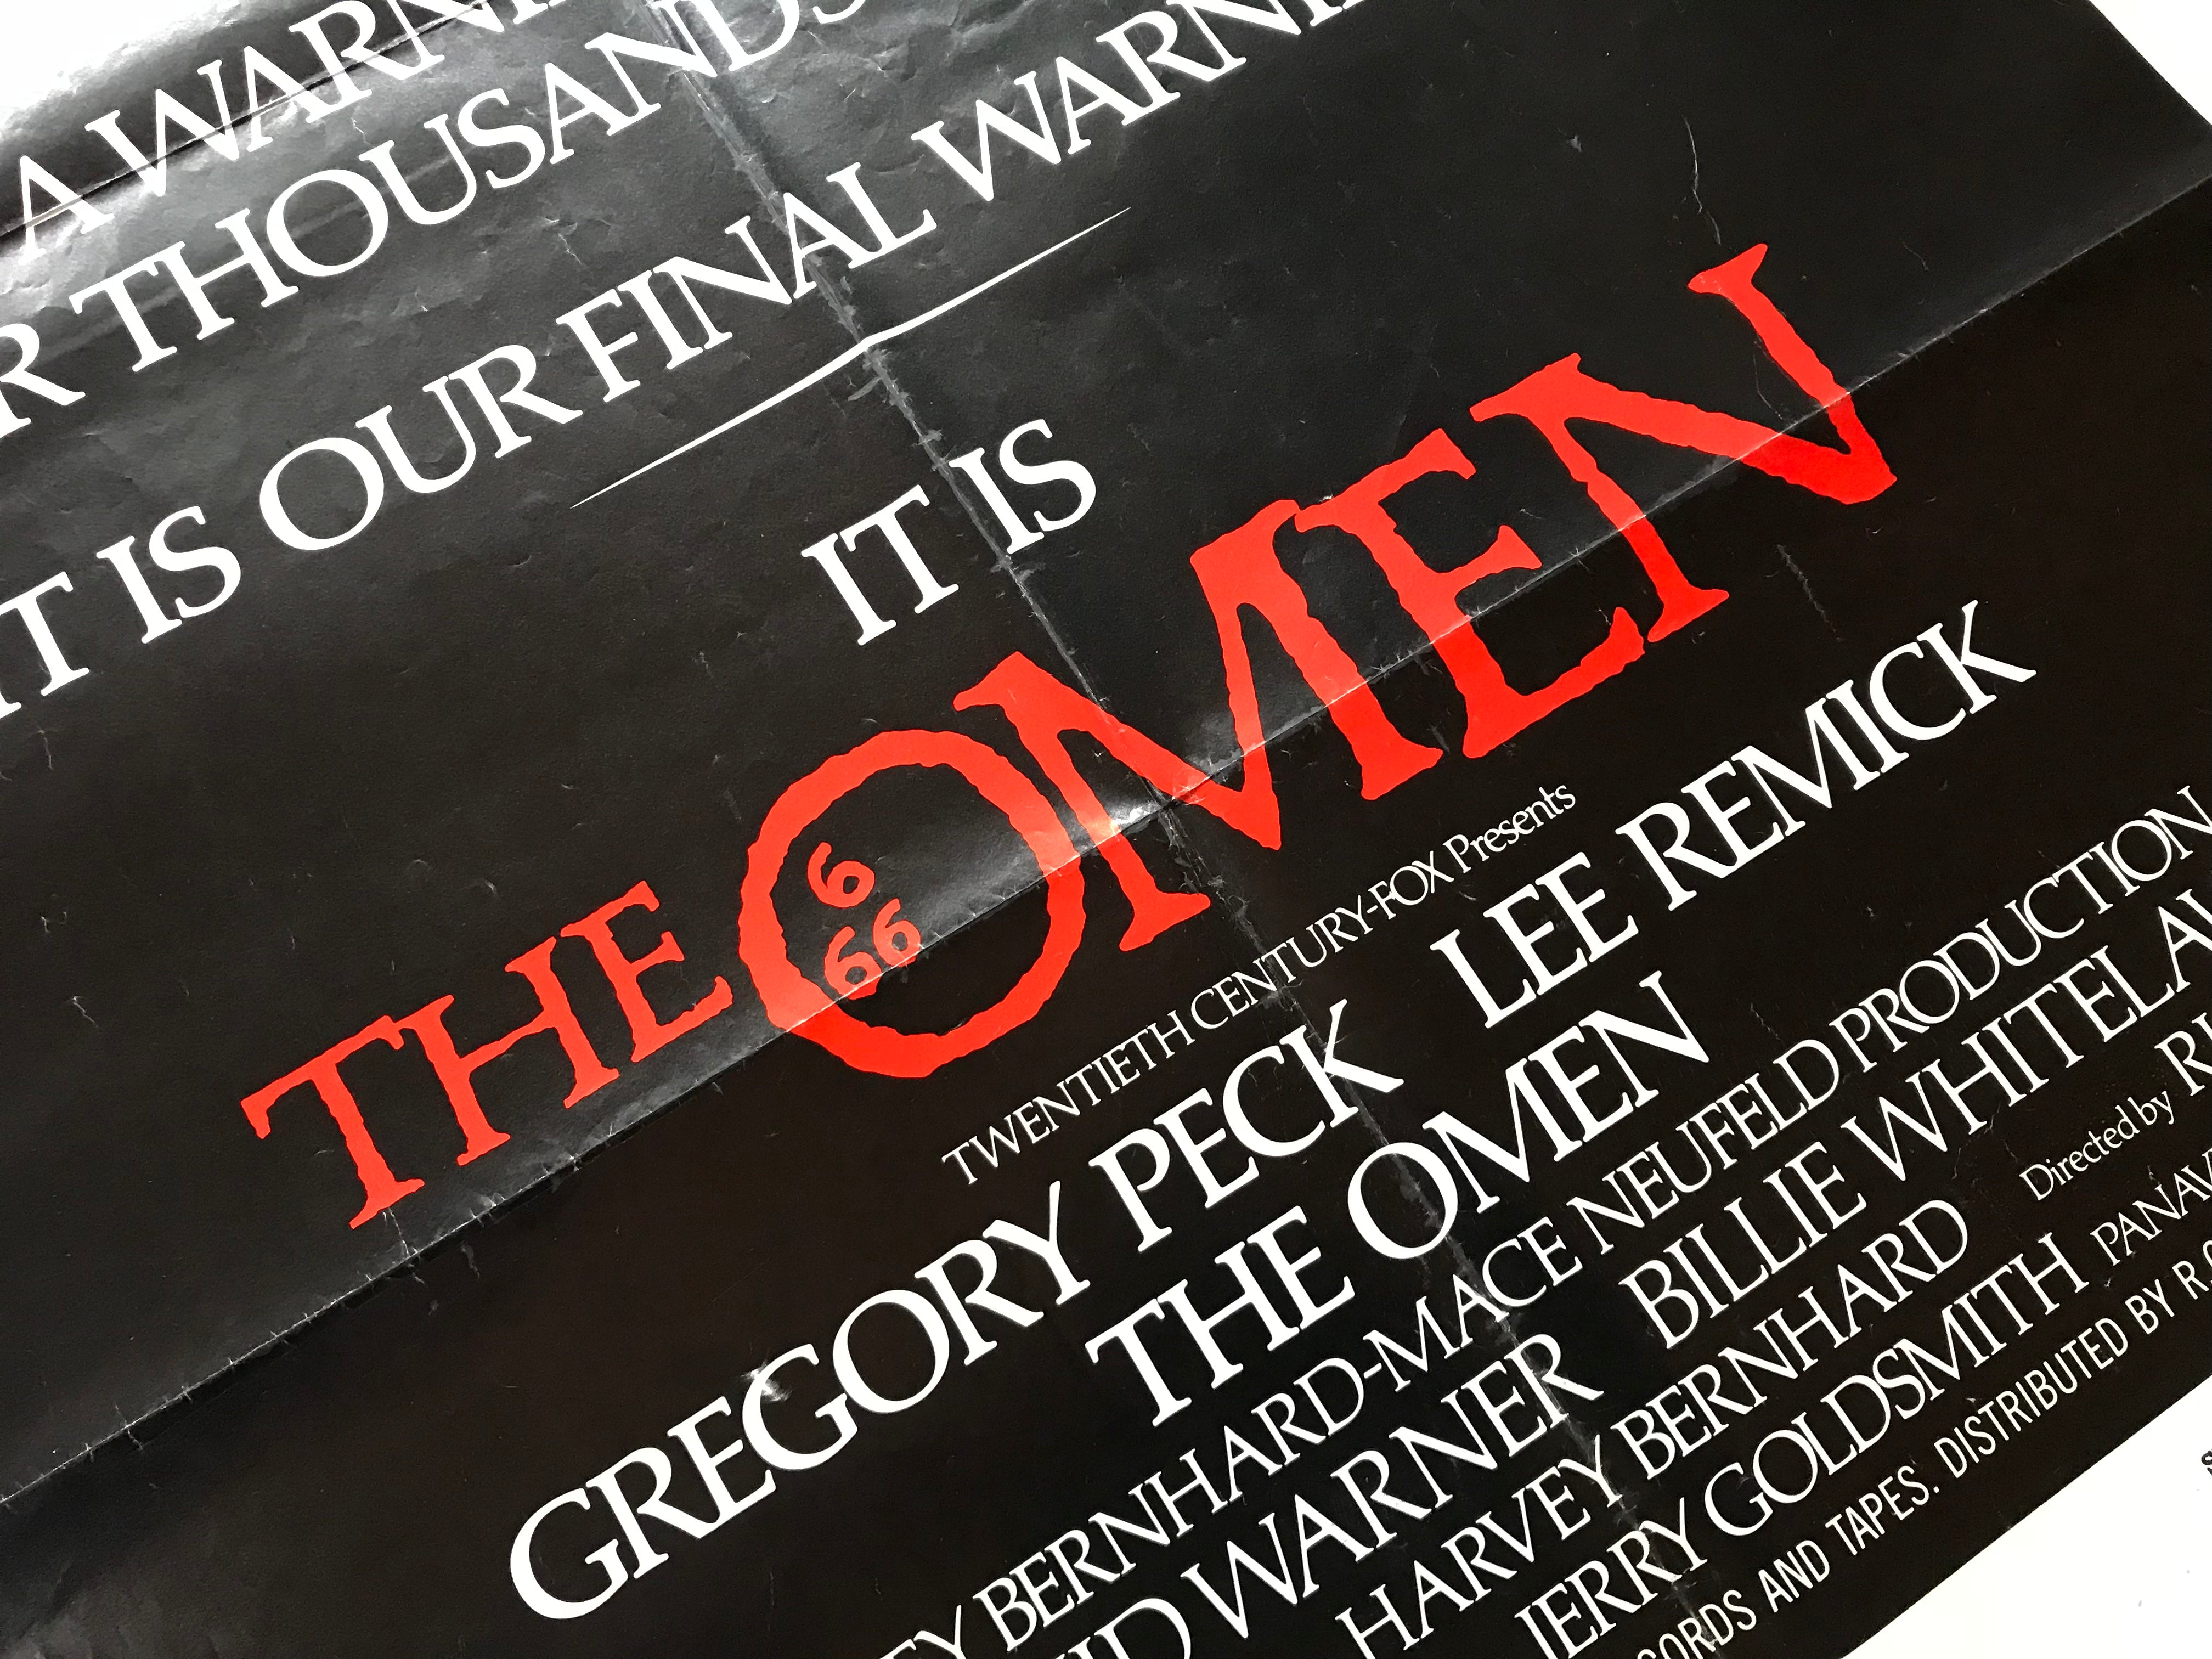 The Omen (1976) - A US One Sheet Advance Film Poster